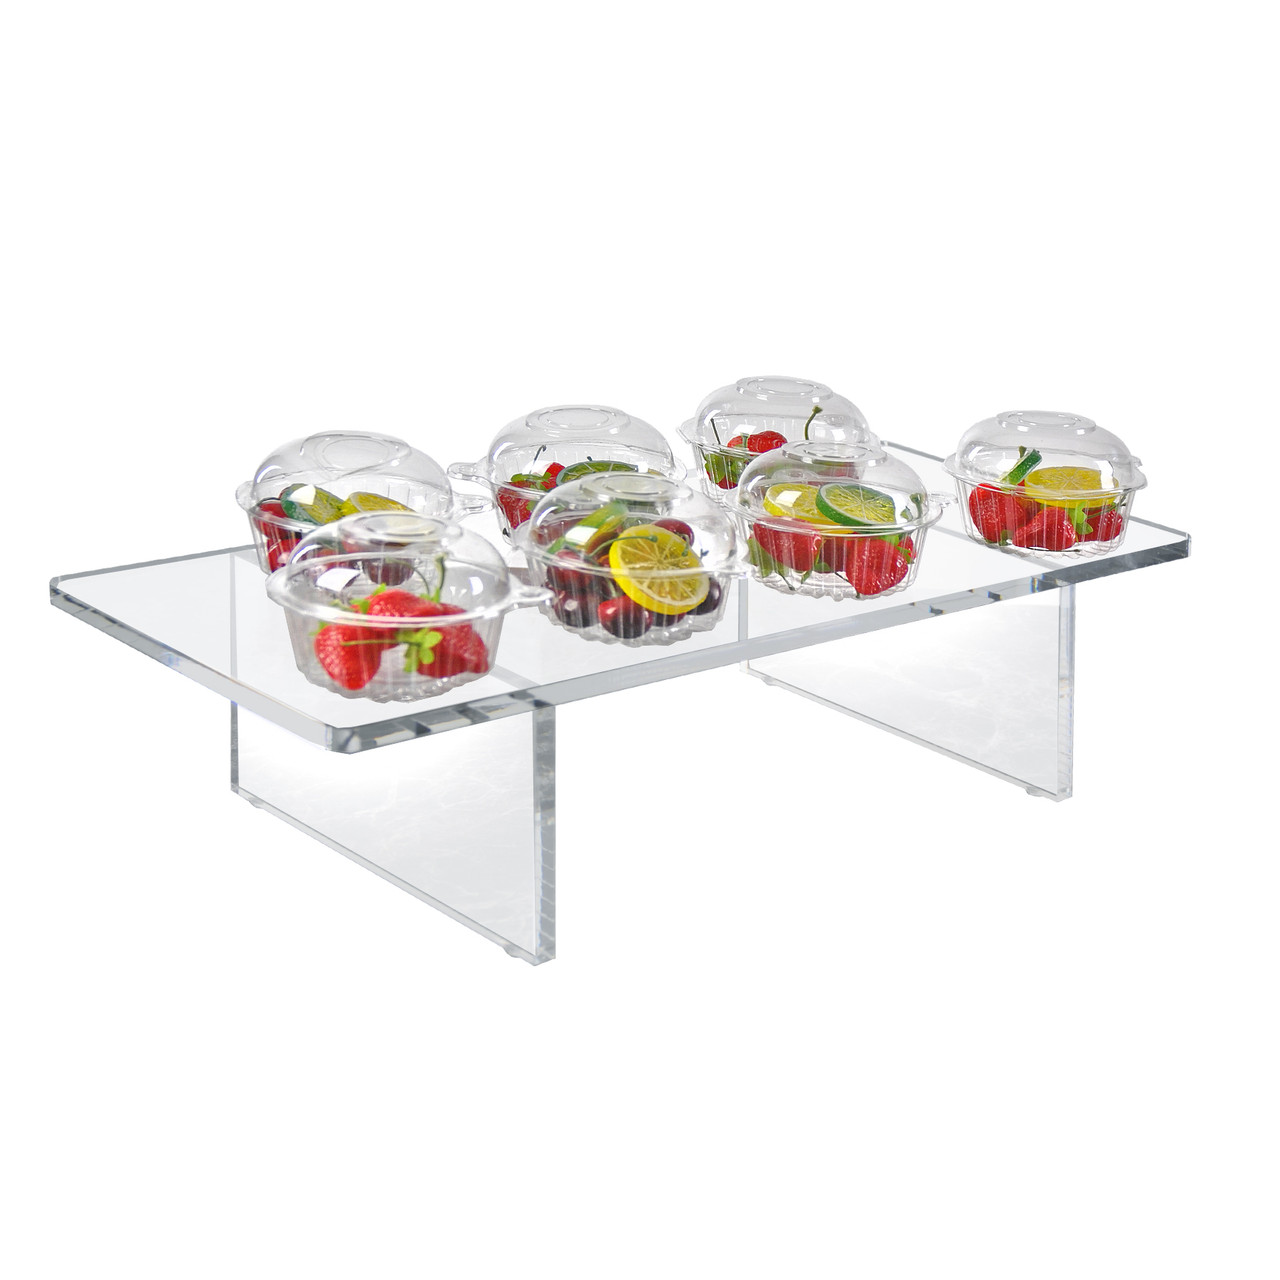 Clear Acrylic 4-Way Divider Shield for Table Overall Size: 63.5 Wide x 23.5 High Azar Displays